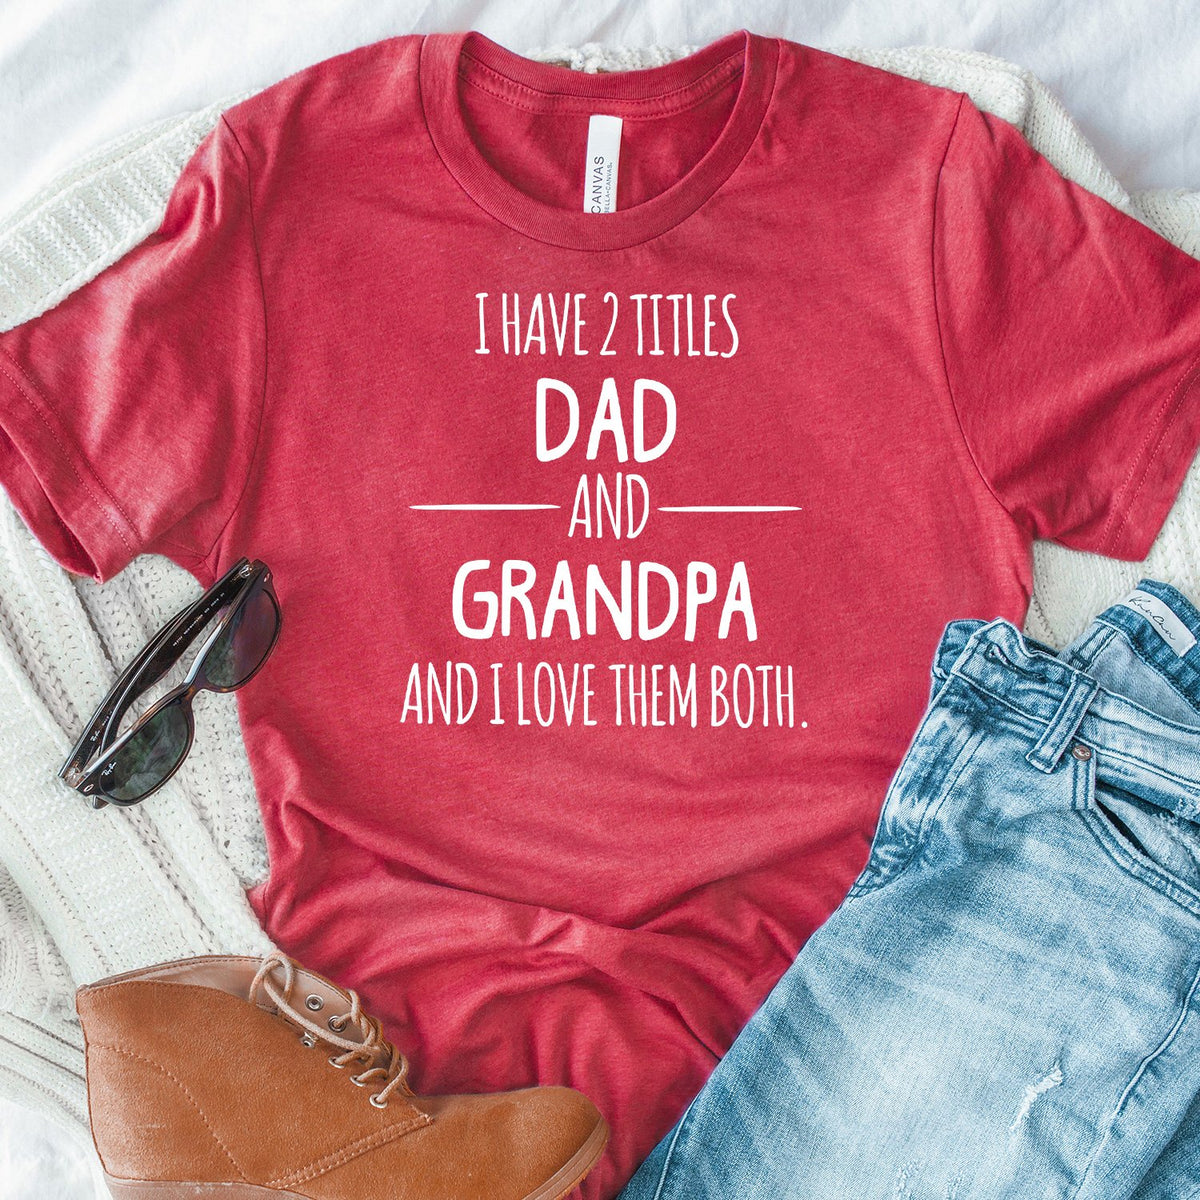 I Have 2 Titles Dad and Grandpa and I Love Them Both - Short Sleeve Tee Shirt